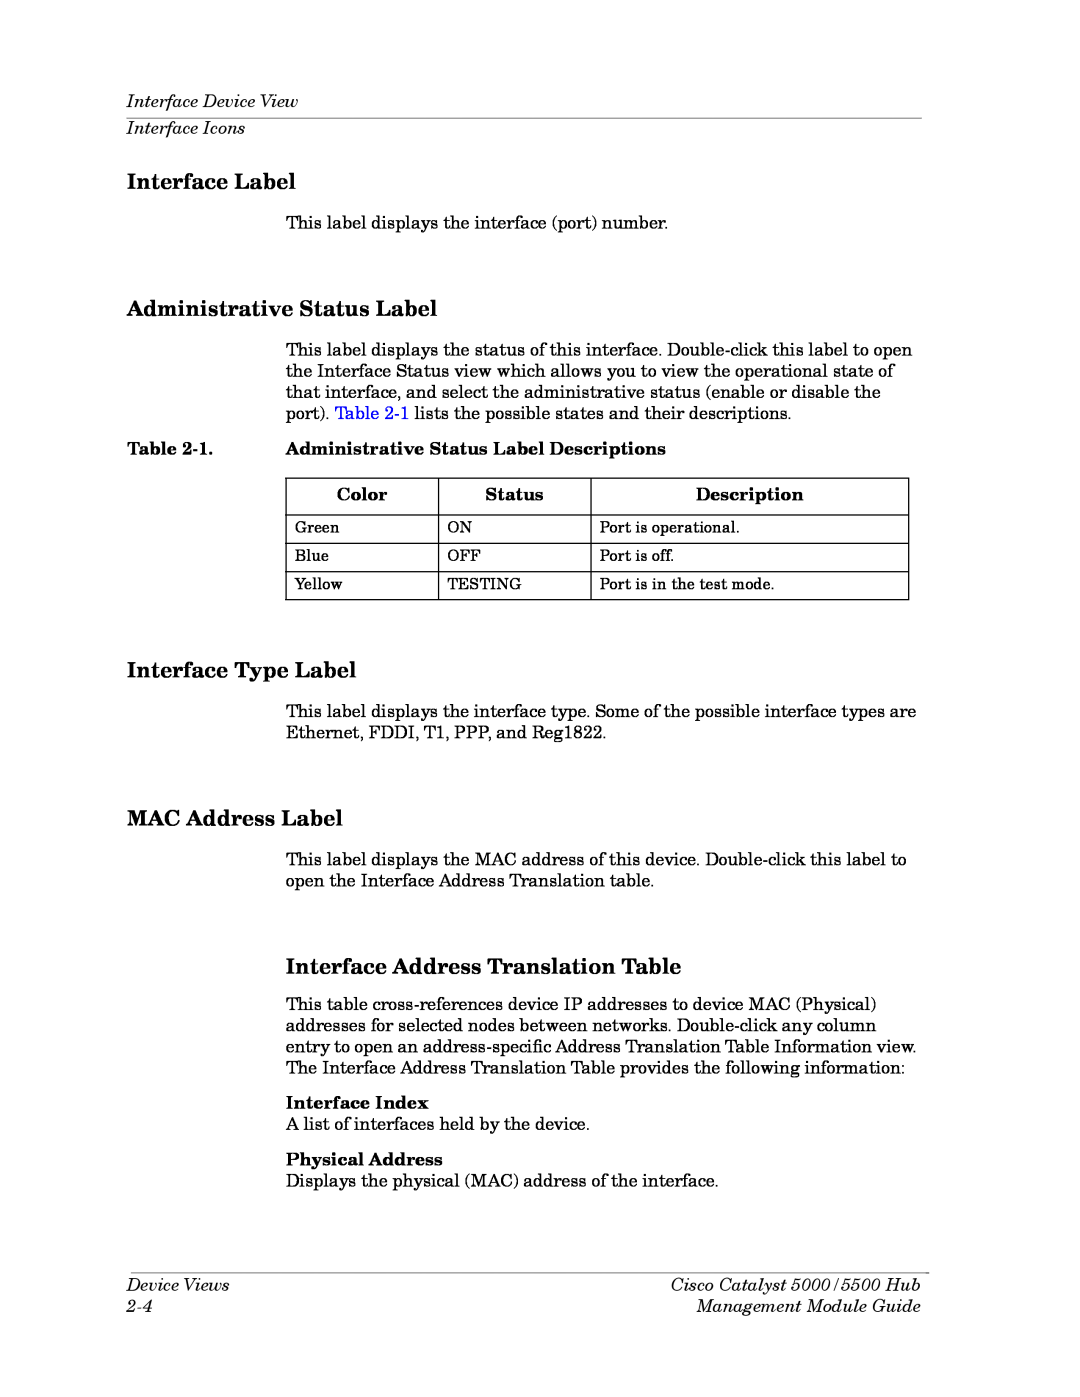 Cabletron Systems 5500 manual Interface Label, Administrative Status Label, Interface Type Label, MAC Address Label, Color 